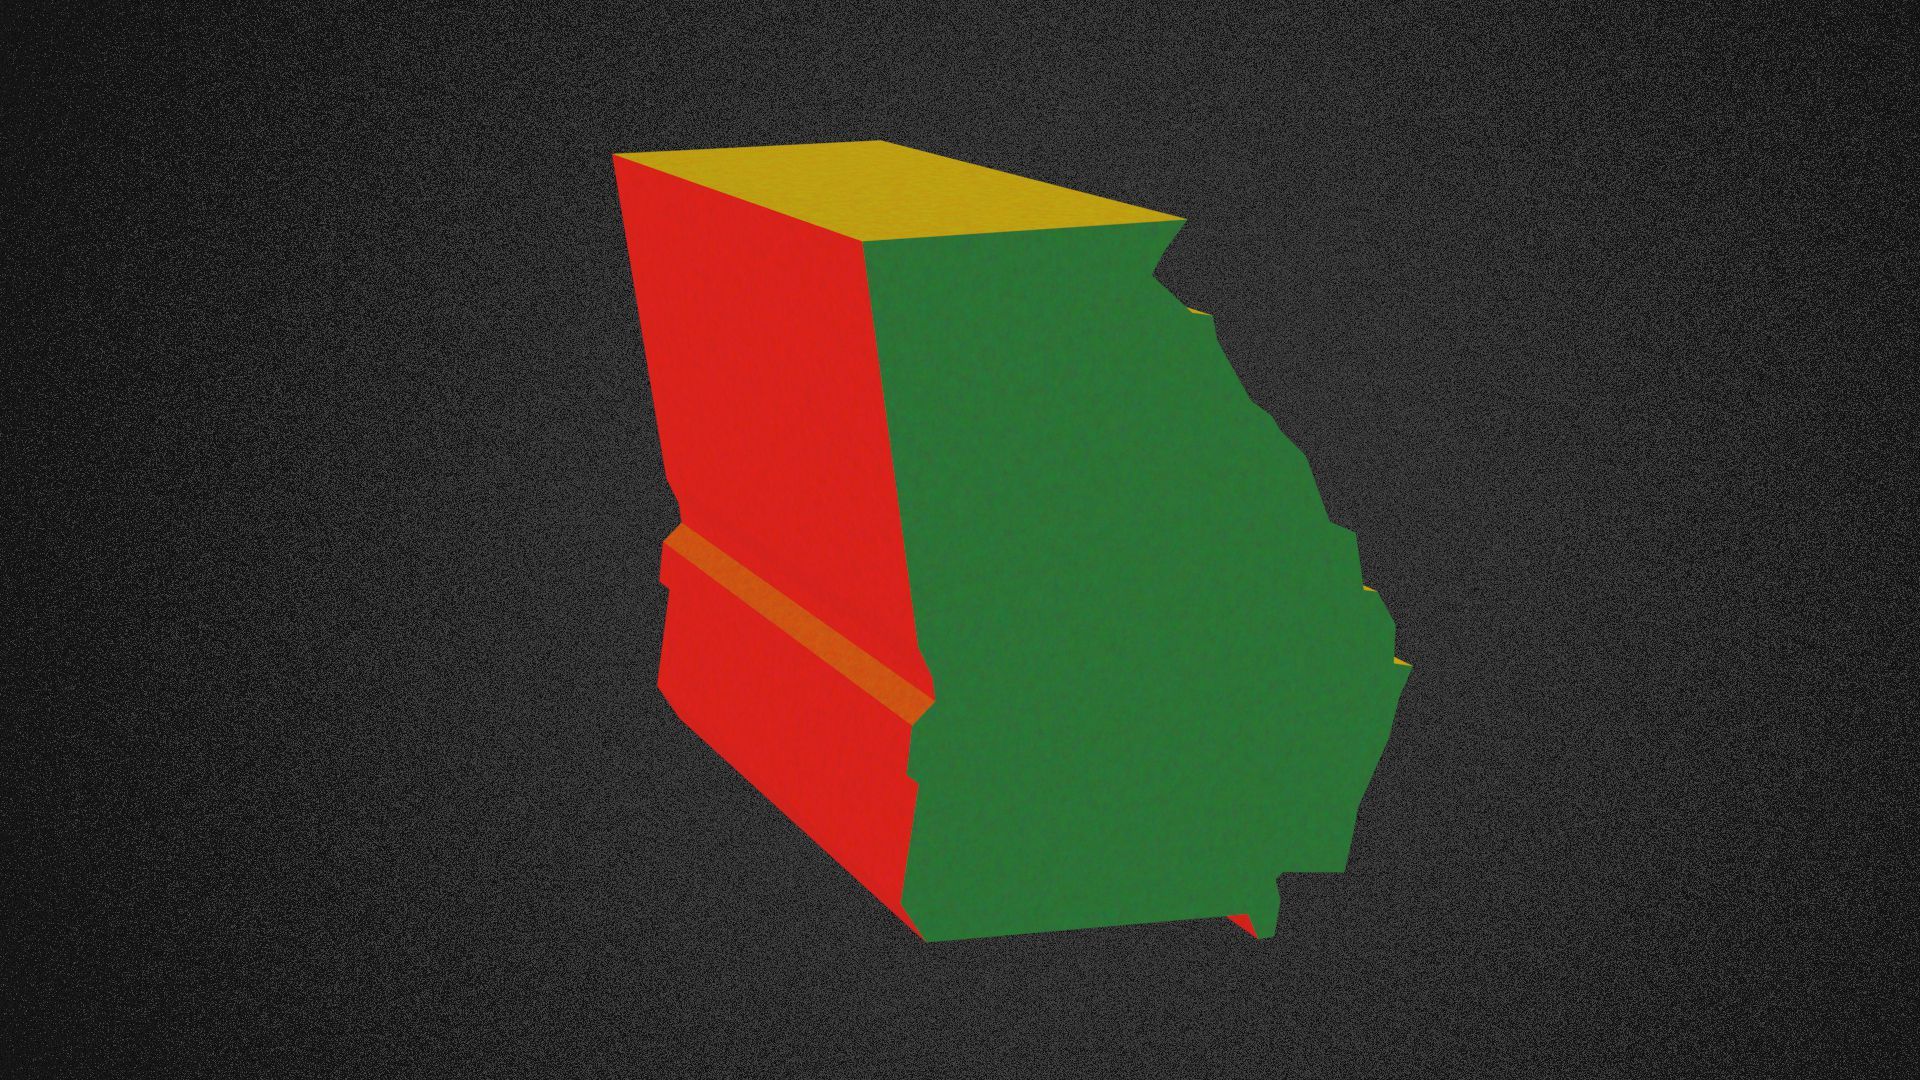 Illustration of the state of Georgia lit by red, green and yellow lights.